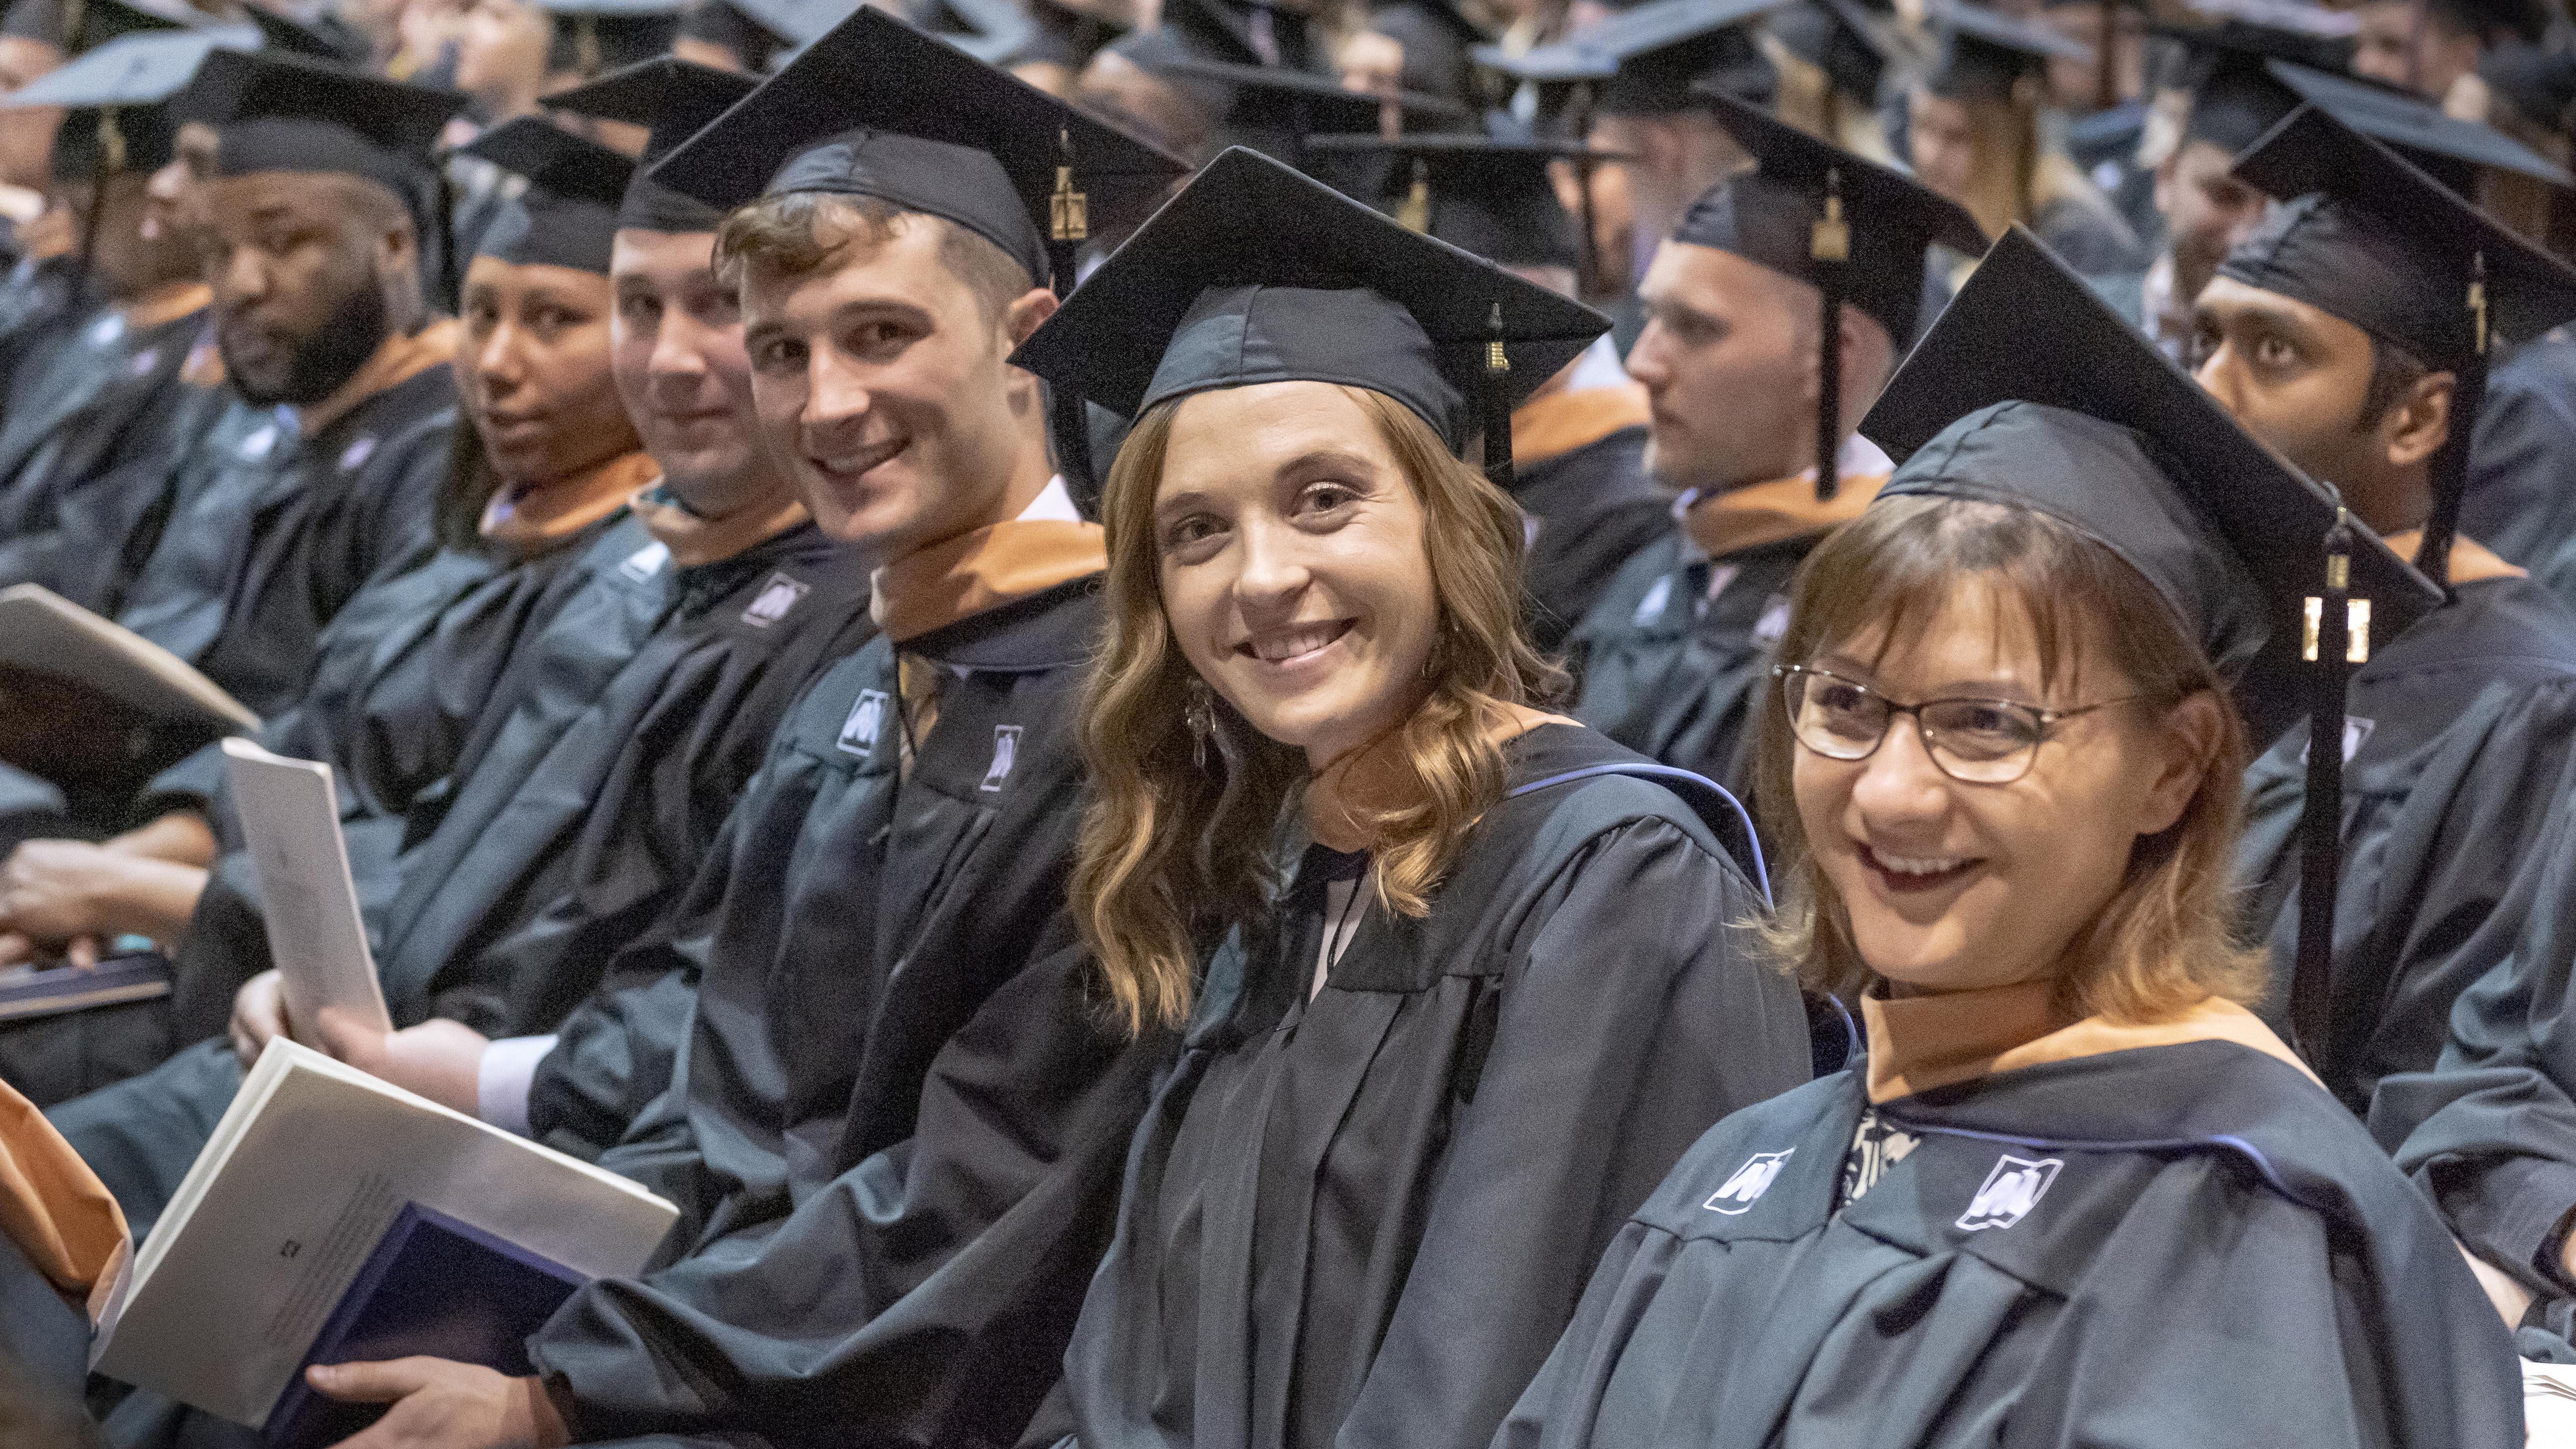 University of Mary graduates smiling during commencement.